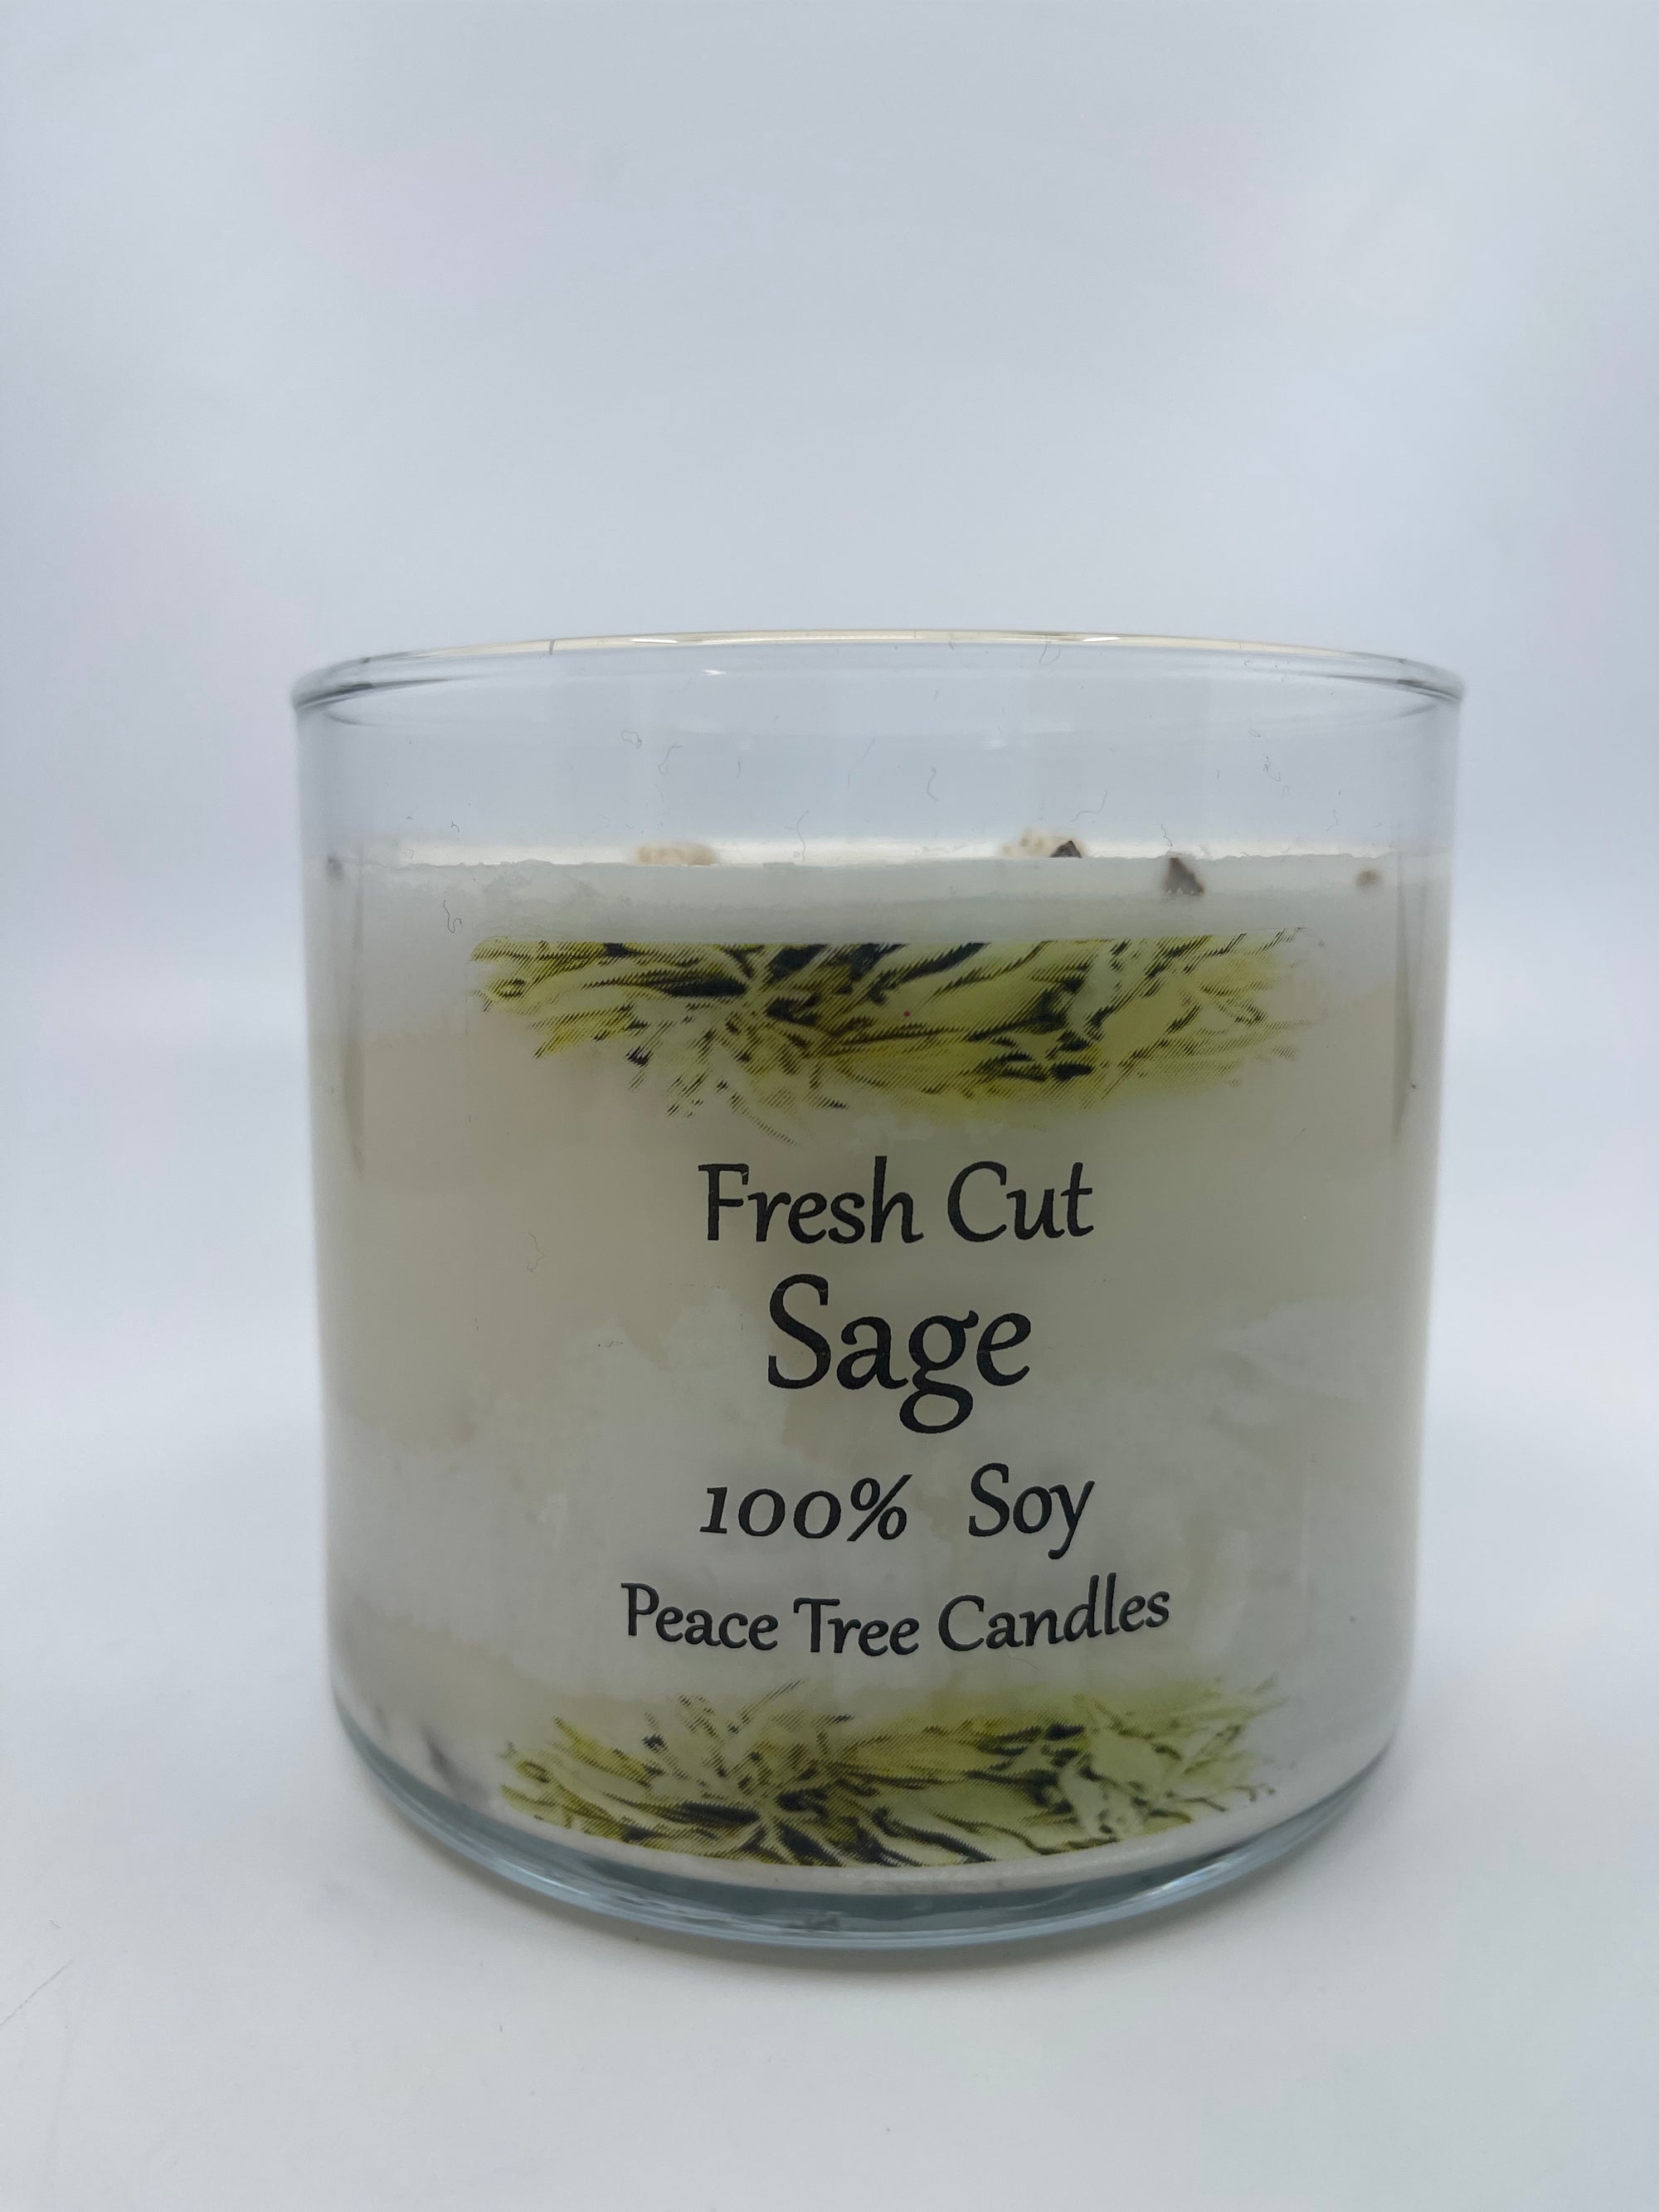 Peace Tree Candle  Fresh Cut Sage or Fresh Cut Sweetgrass 16oz - Peace Tree Candle  Fresh Cut Sage or Fresh Cut Sweetgrass 16oz -  - House of Himwitsa Native Art Gallery and Gifts